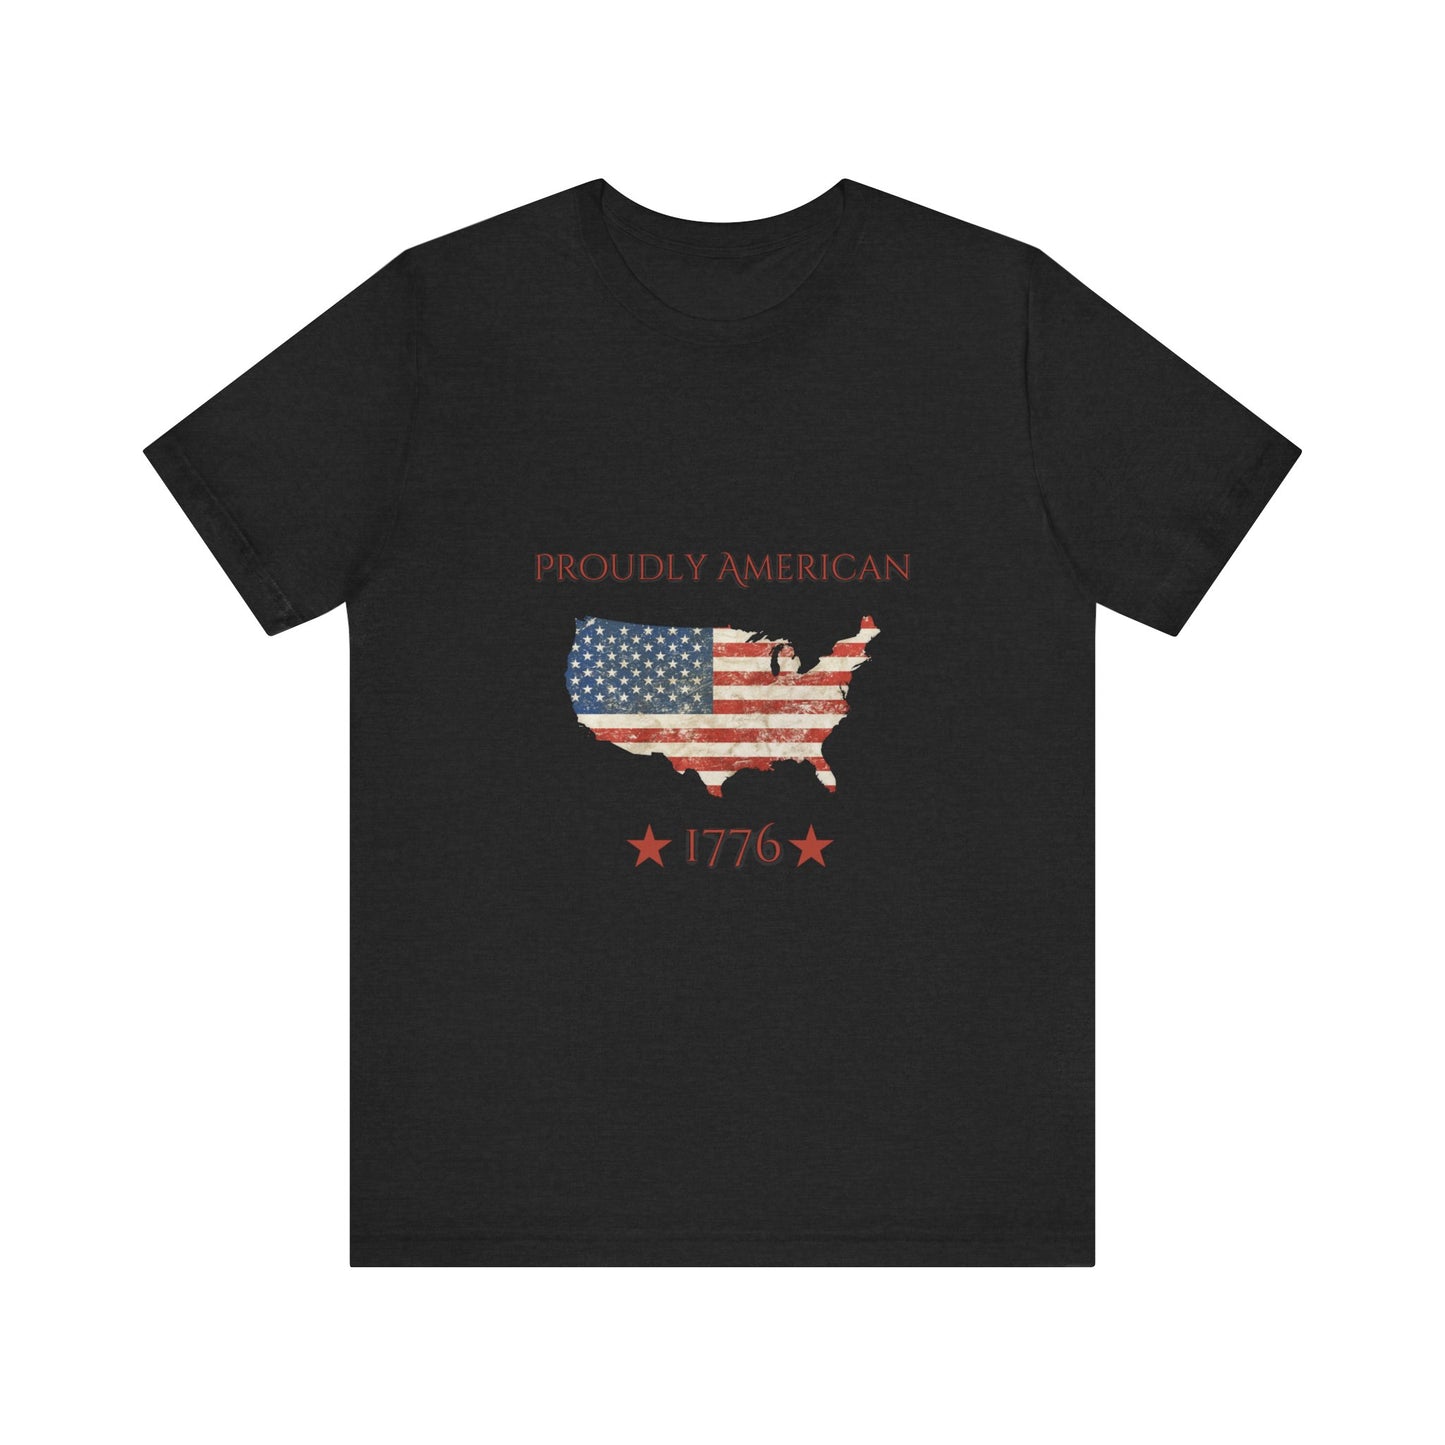 Proudly American Tee